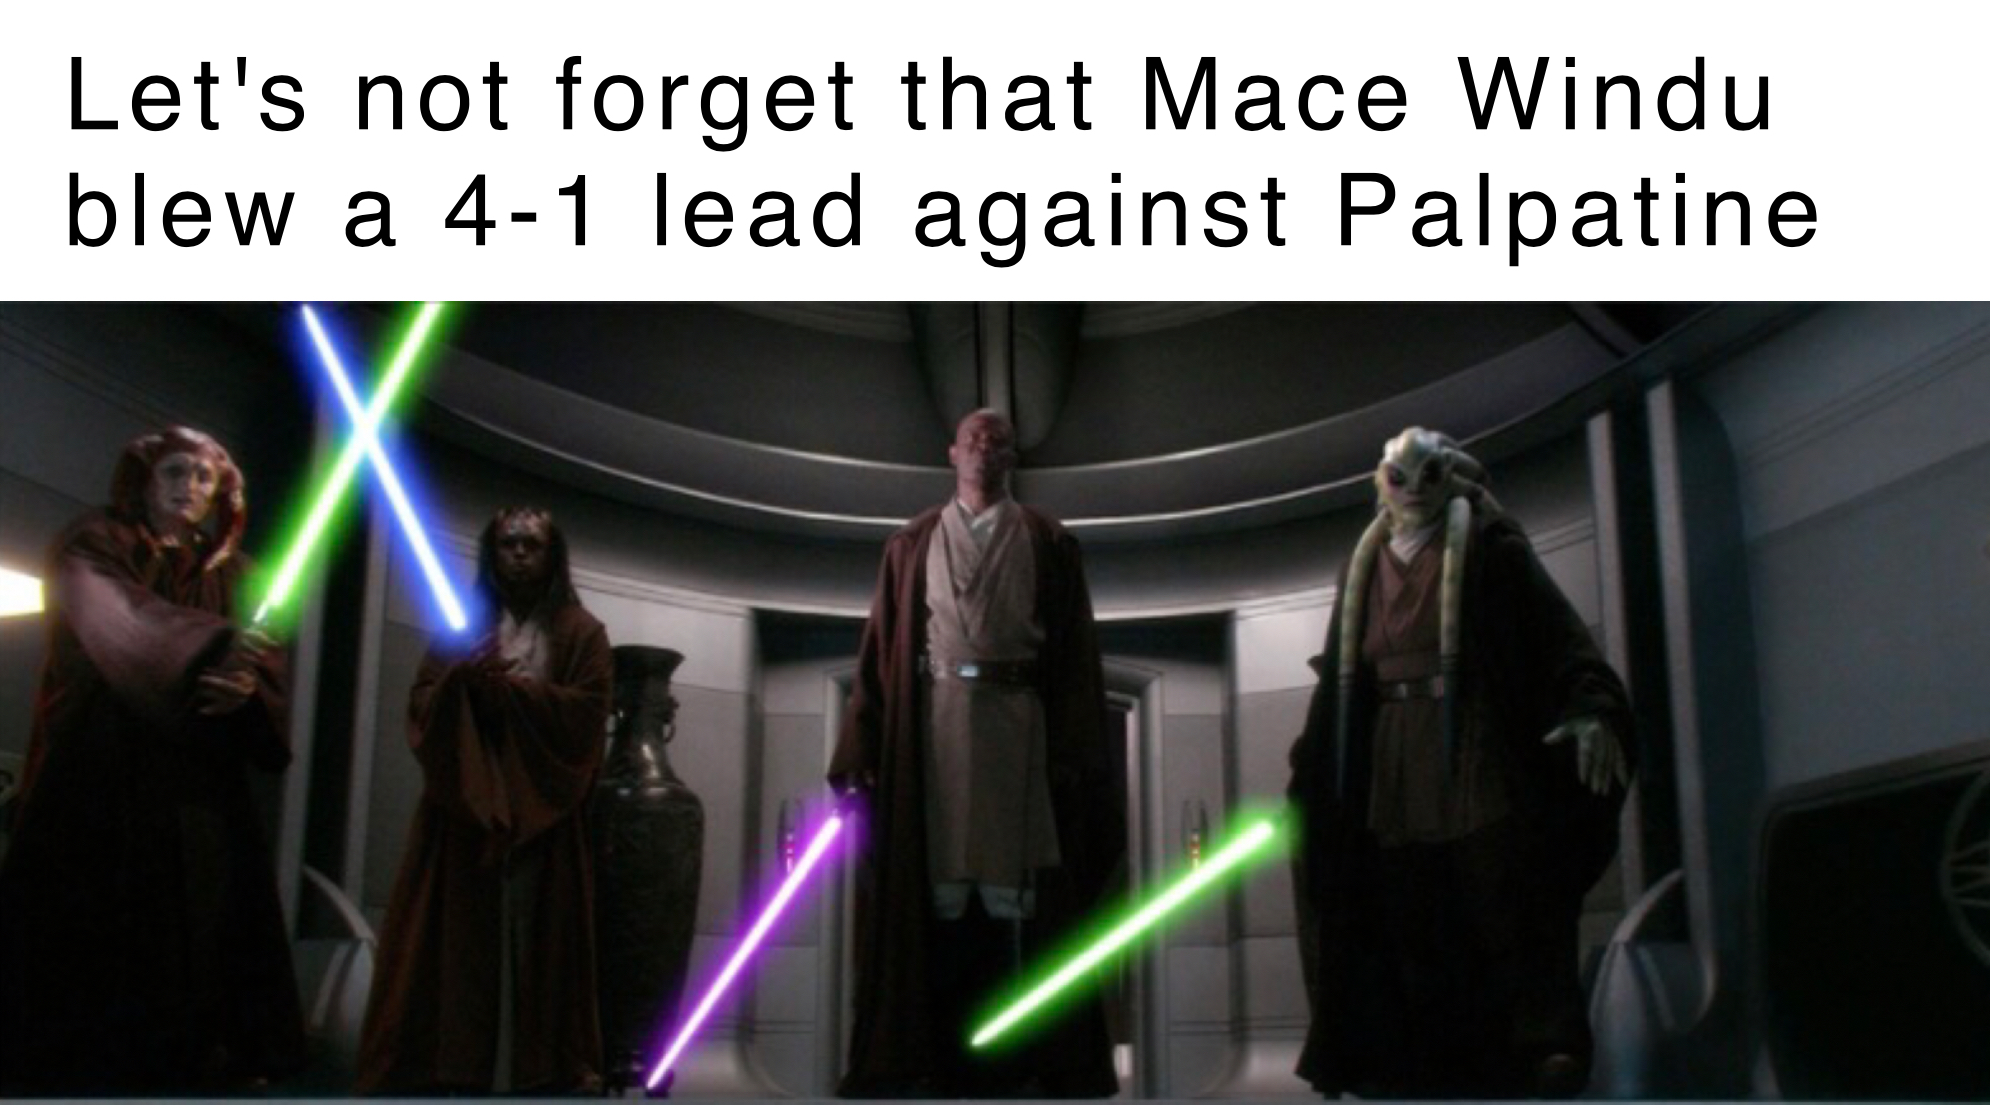 star wars - Let's not forget that Mace Windu blew a 41 lead against Palpatine